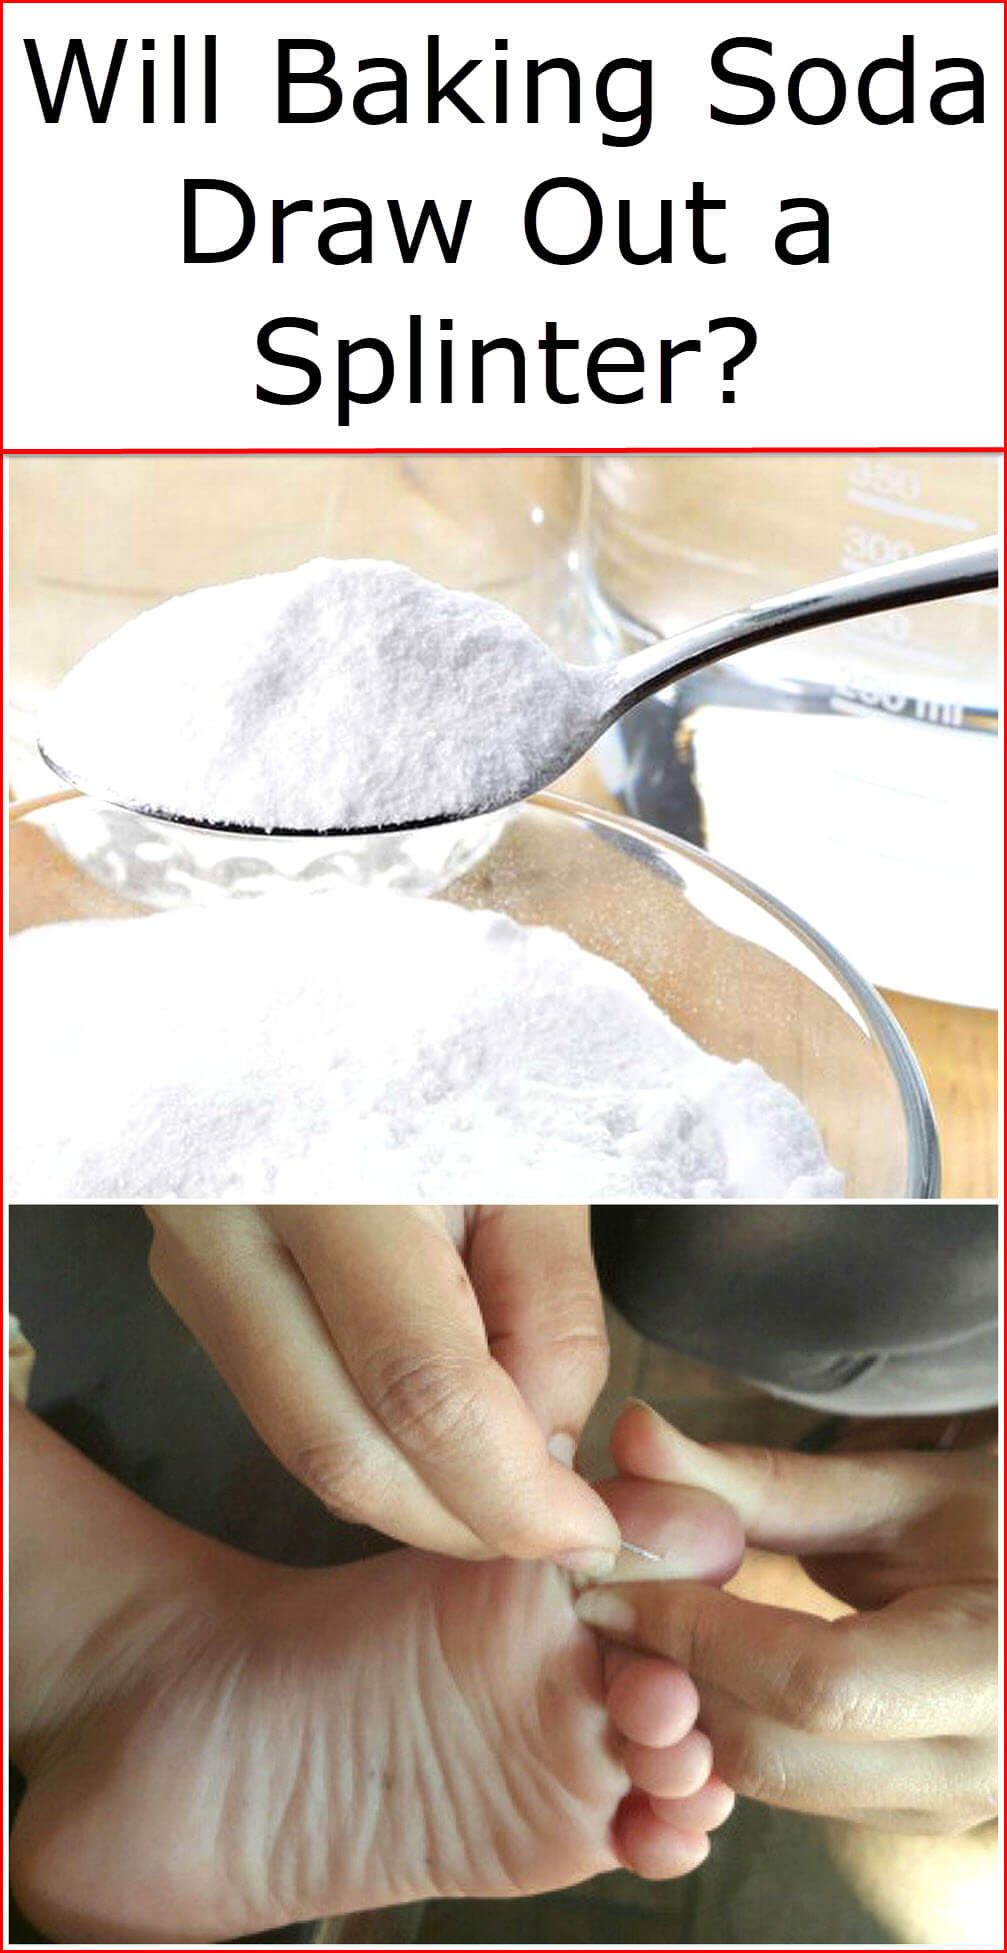 Will Baking Soda Draw Out a Splinter? Baking Soda Uses and DIY Home